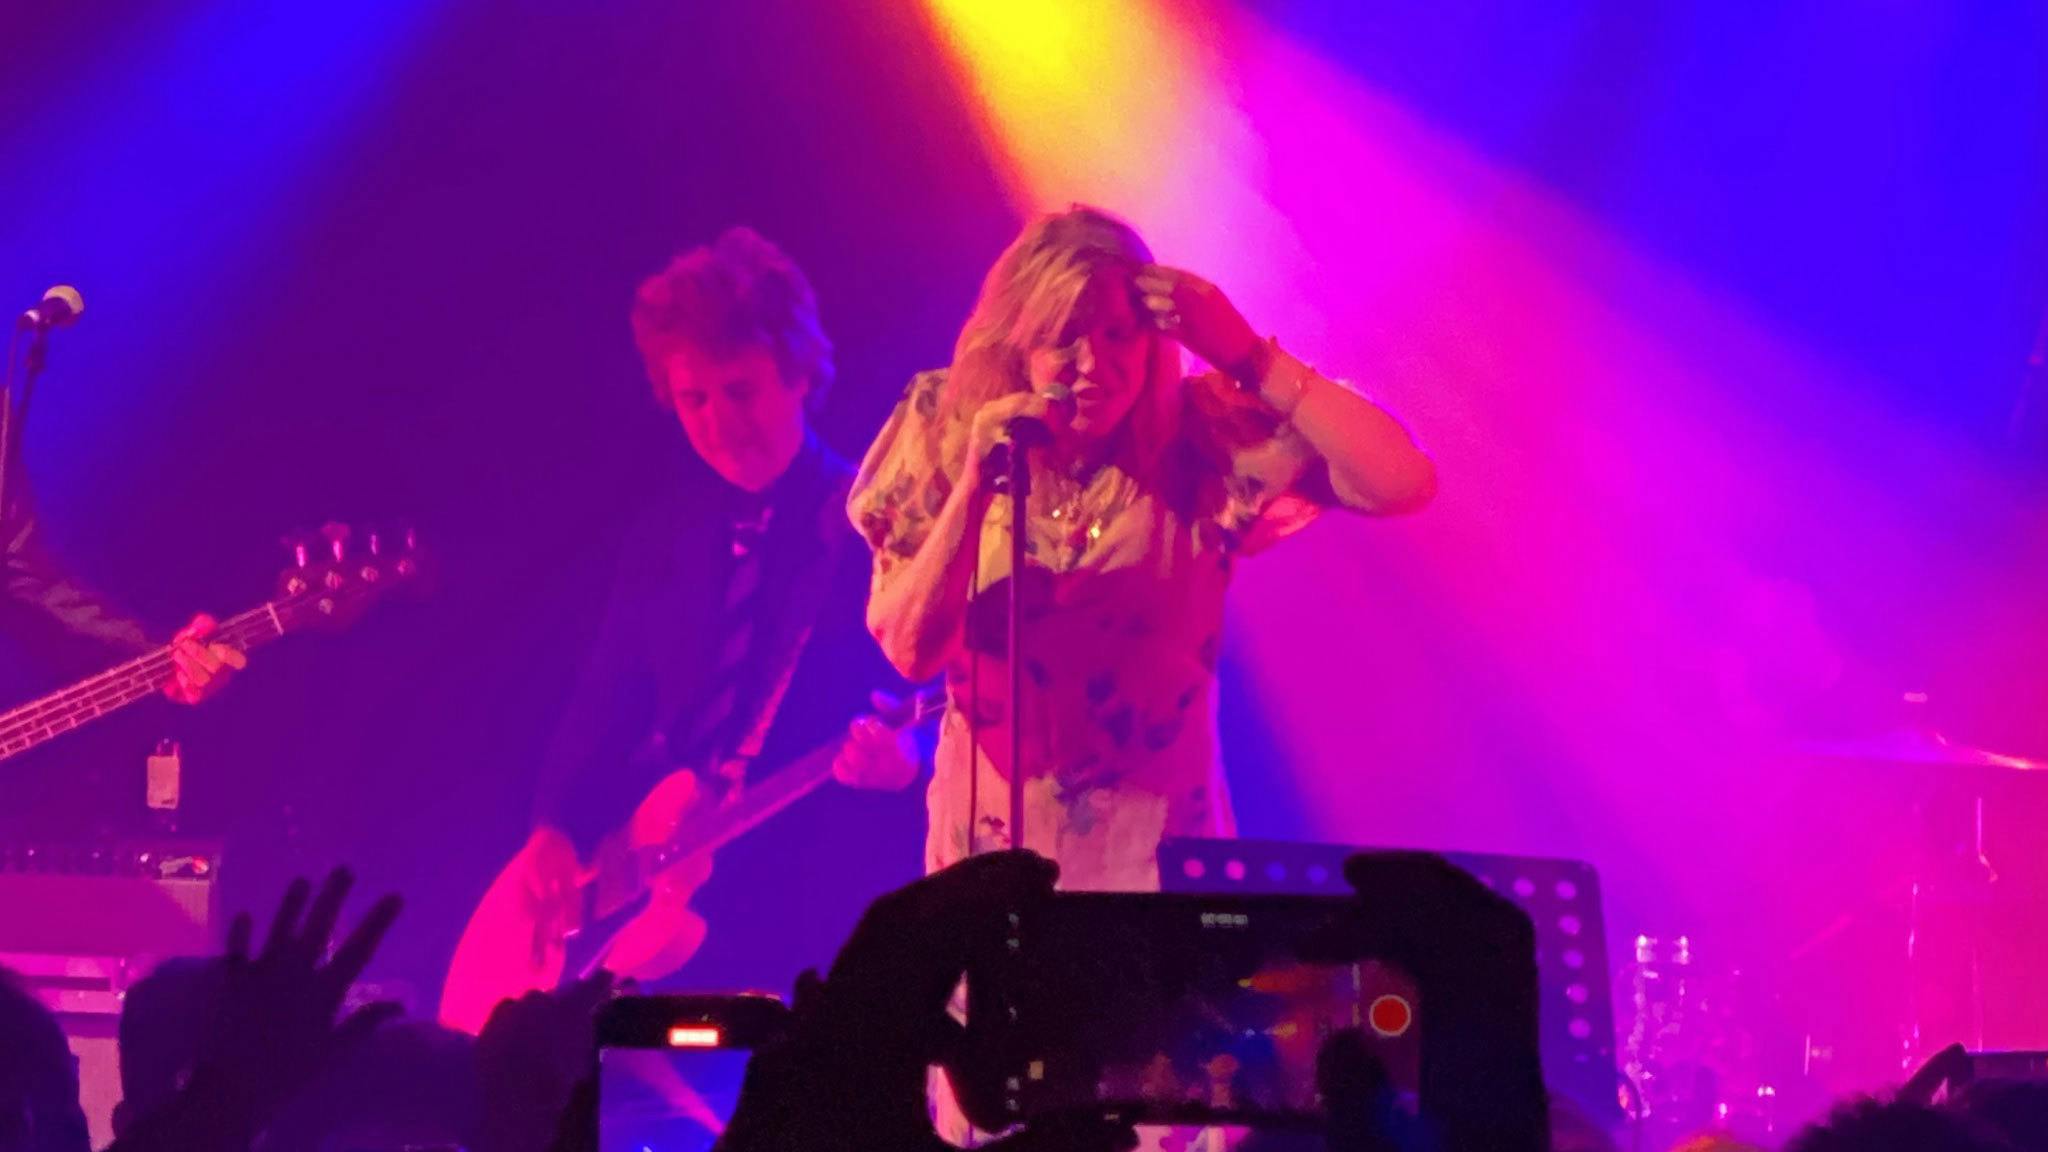 See Courtney Love join Billie Joe Armstrong onstage to perform three covers